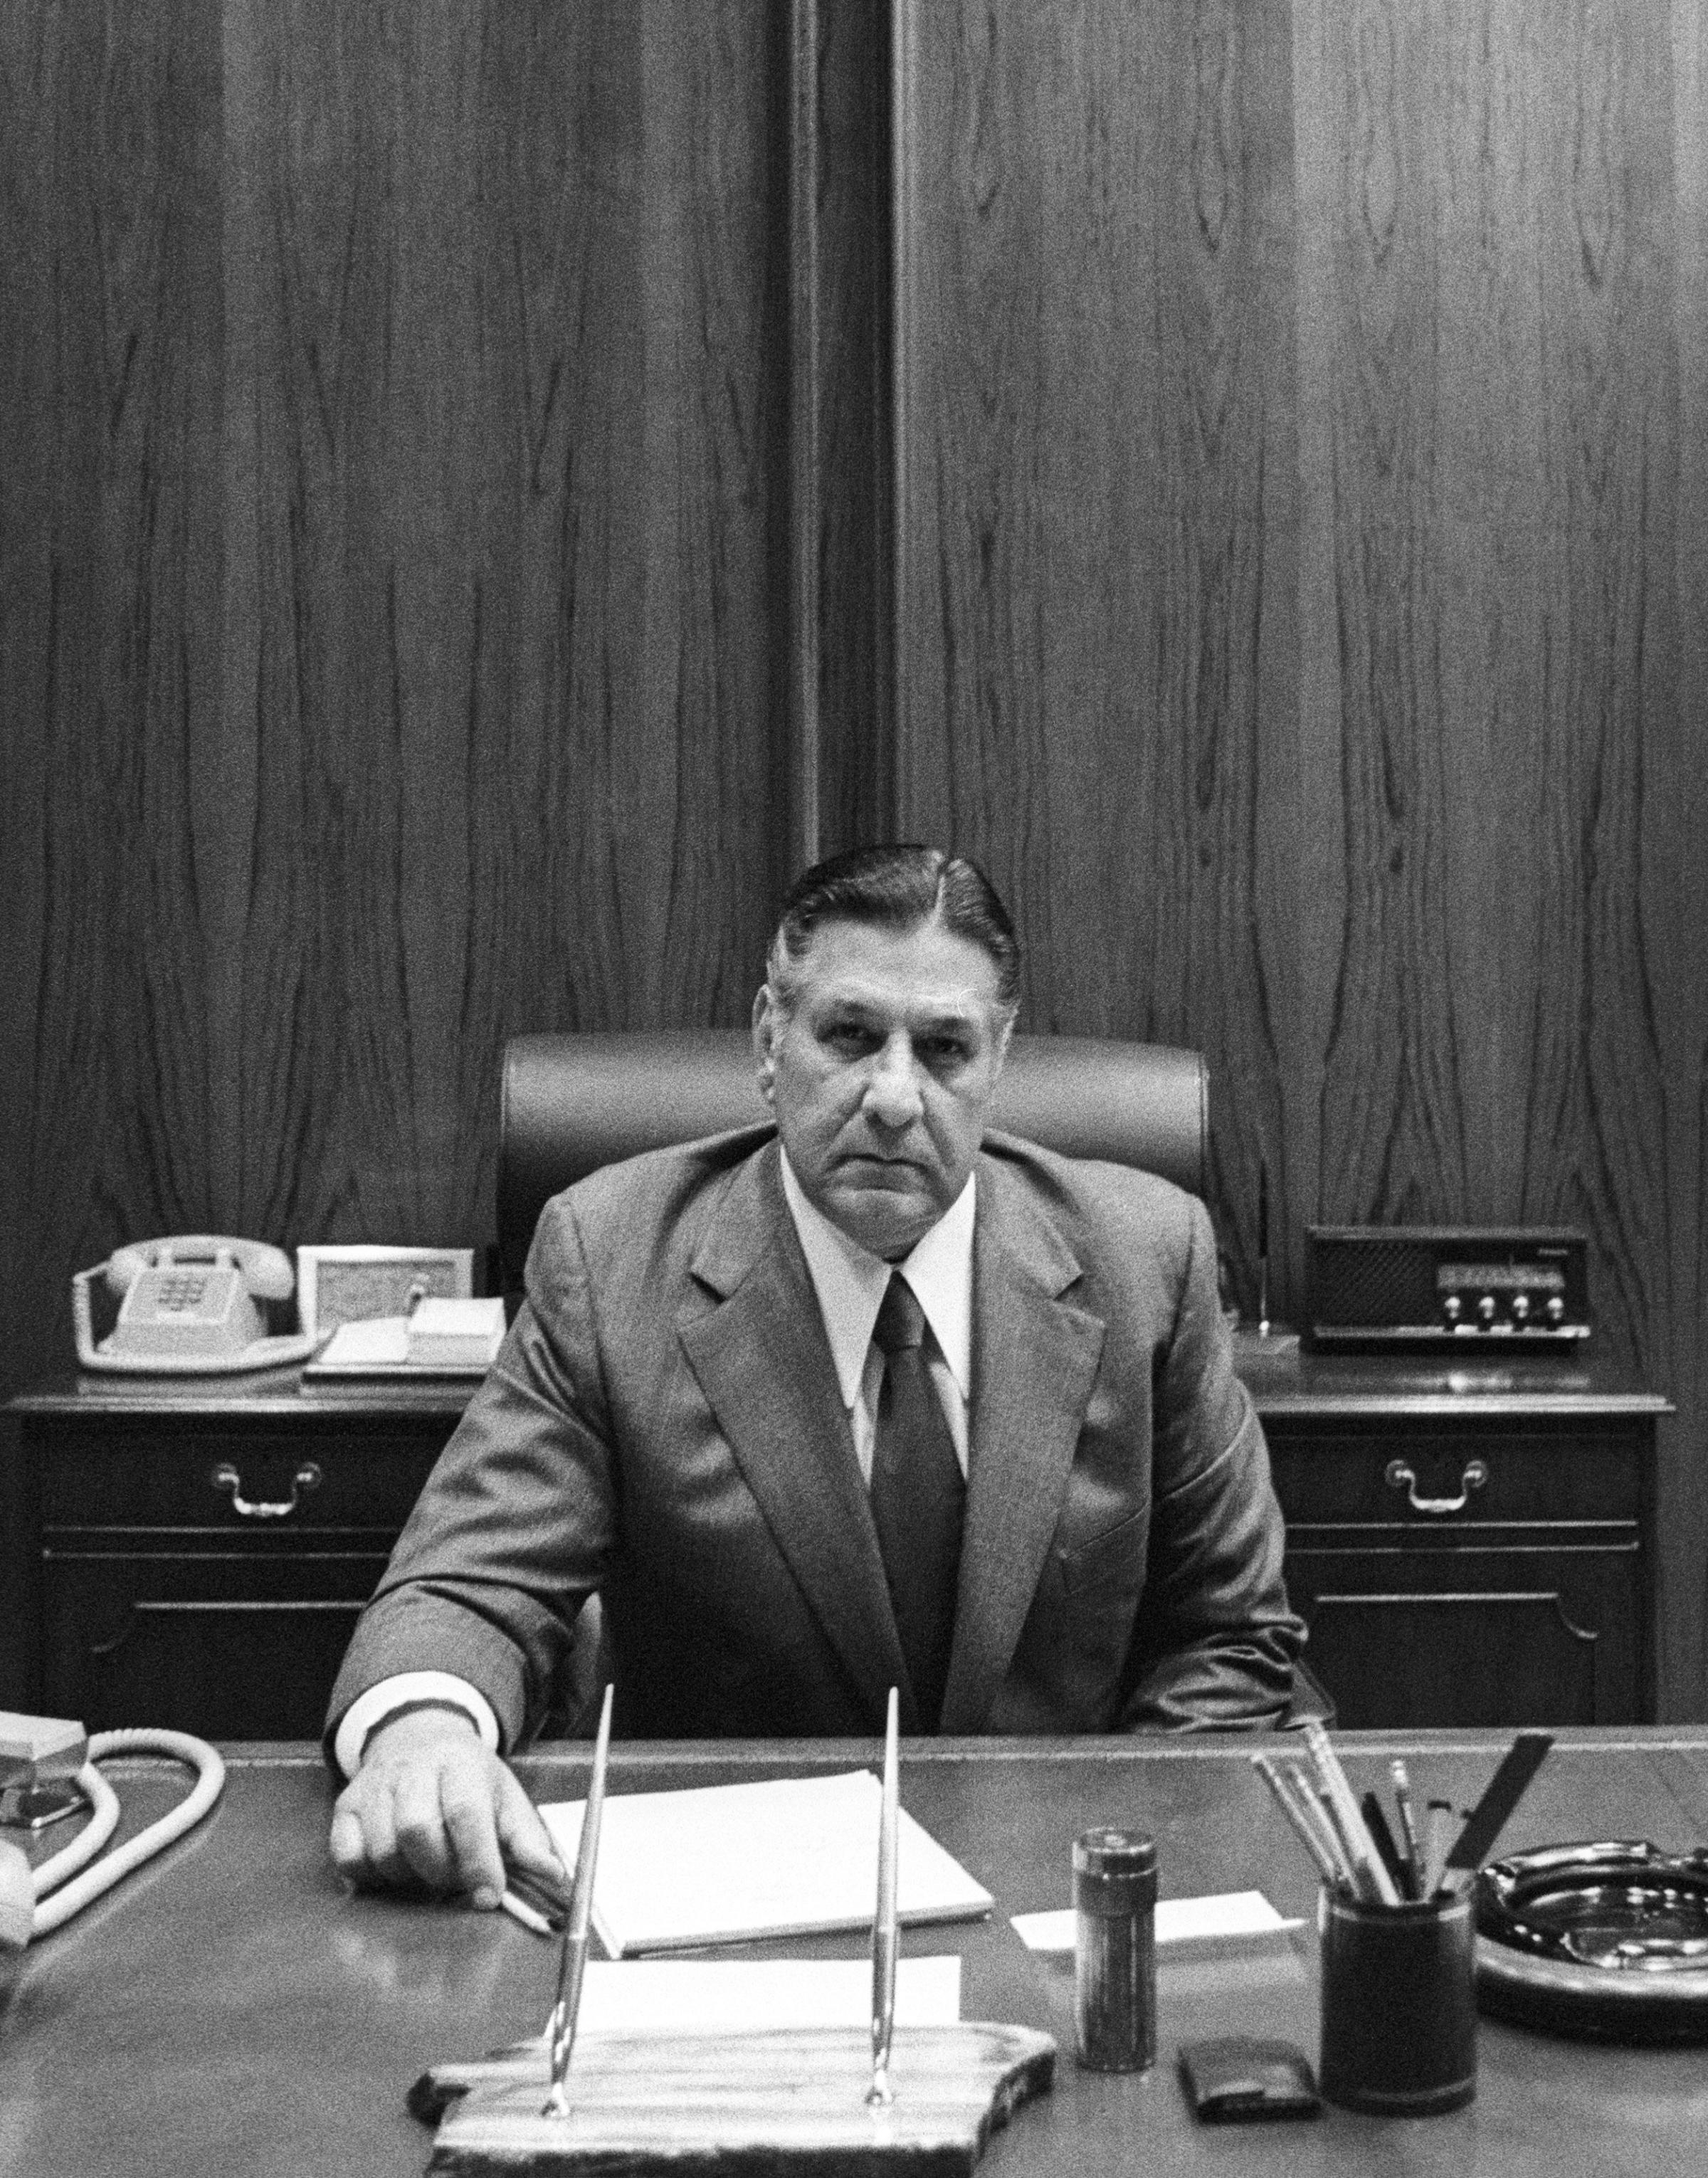 Mayor Frank Rizzo Posing For A Portrait